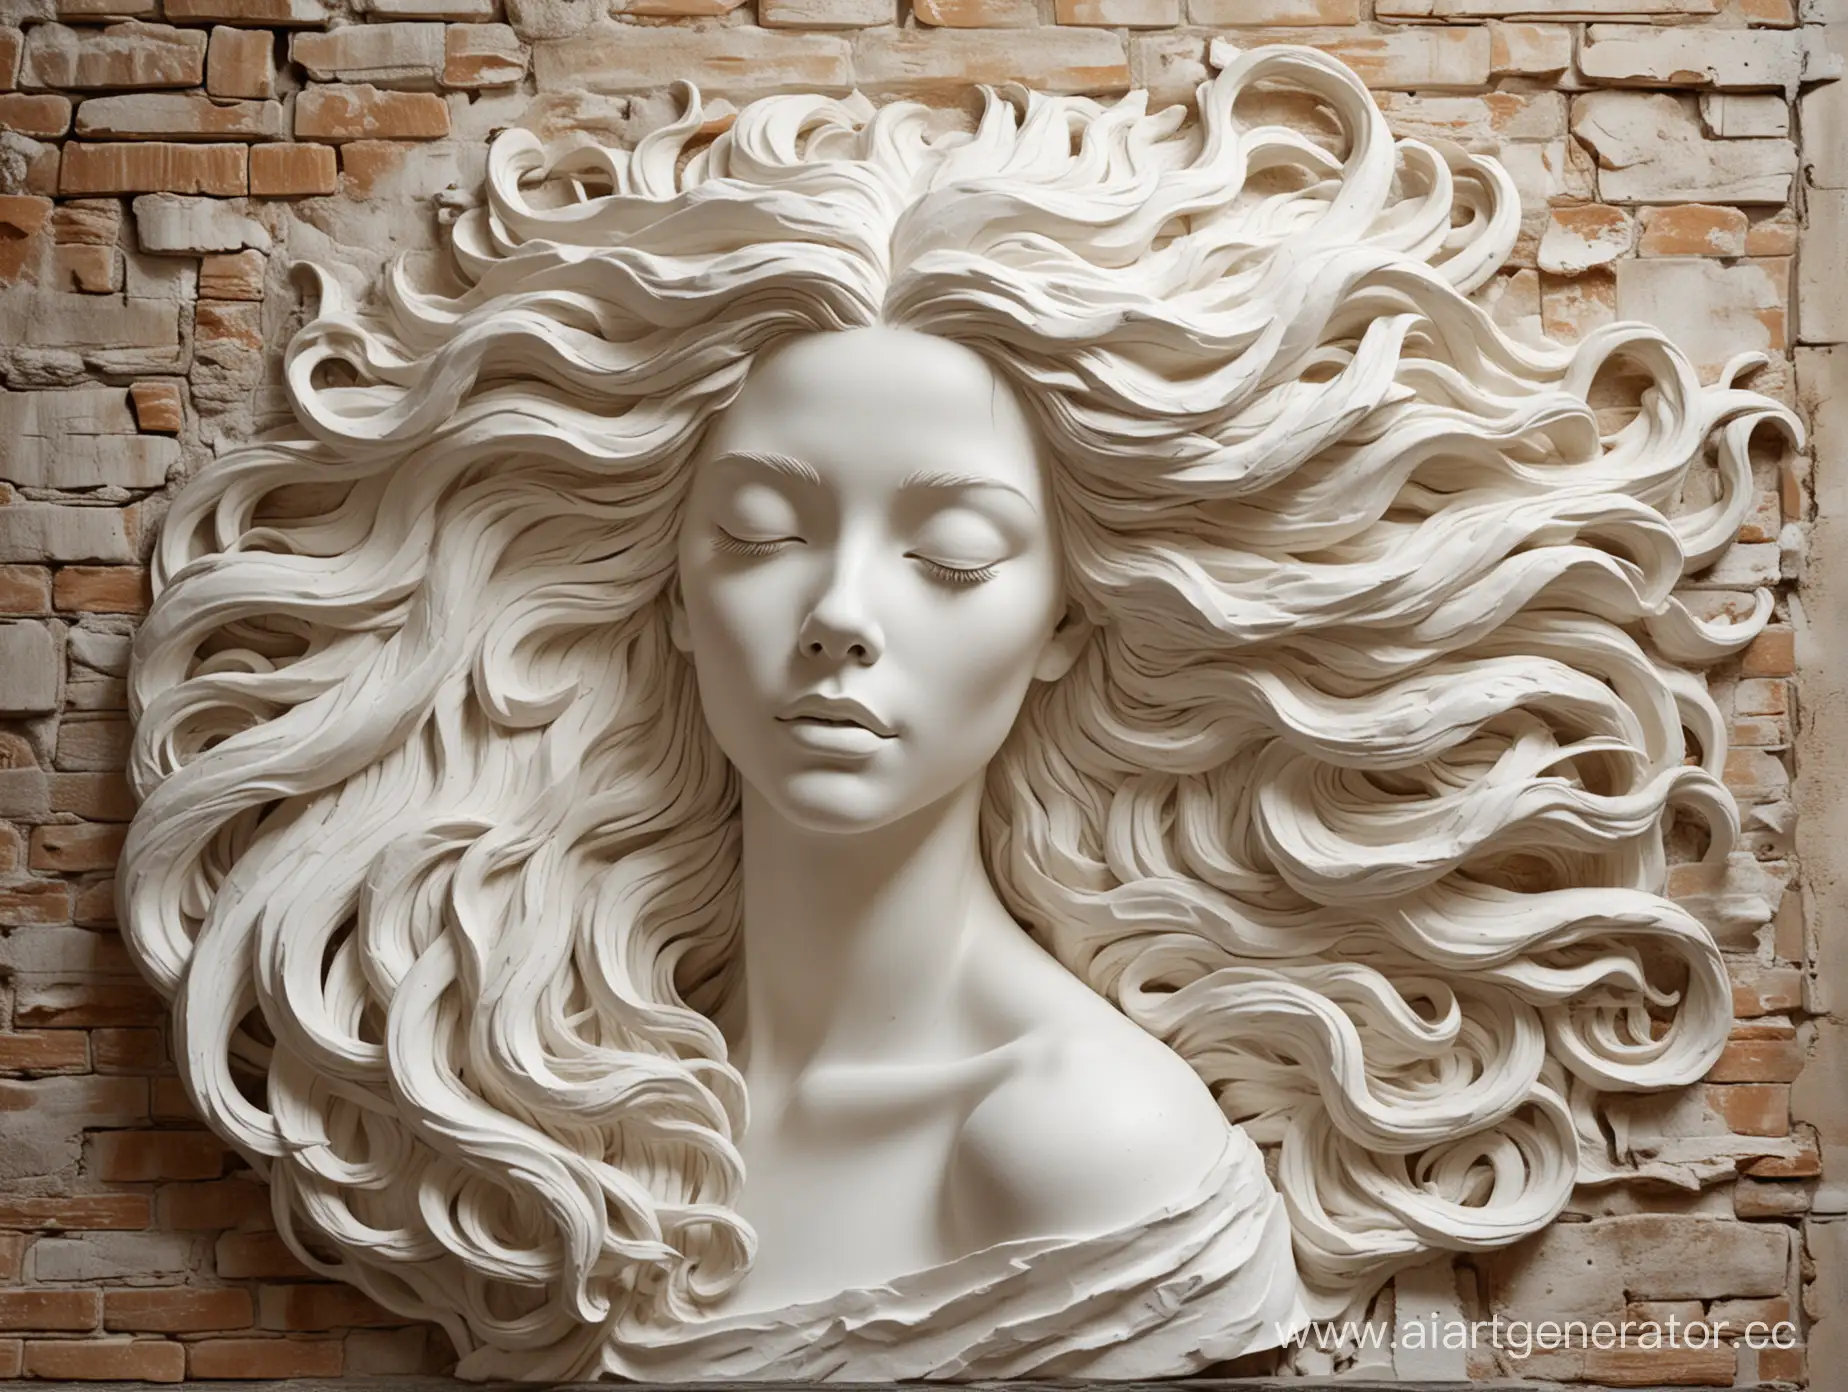 Dreamy-Young-Woman-BasRelief-Sculpture-with-Flowing-Hair-on-Aged-Wall